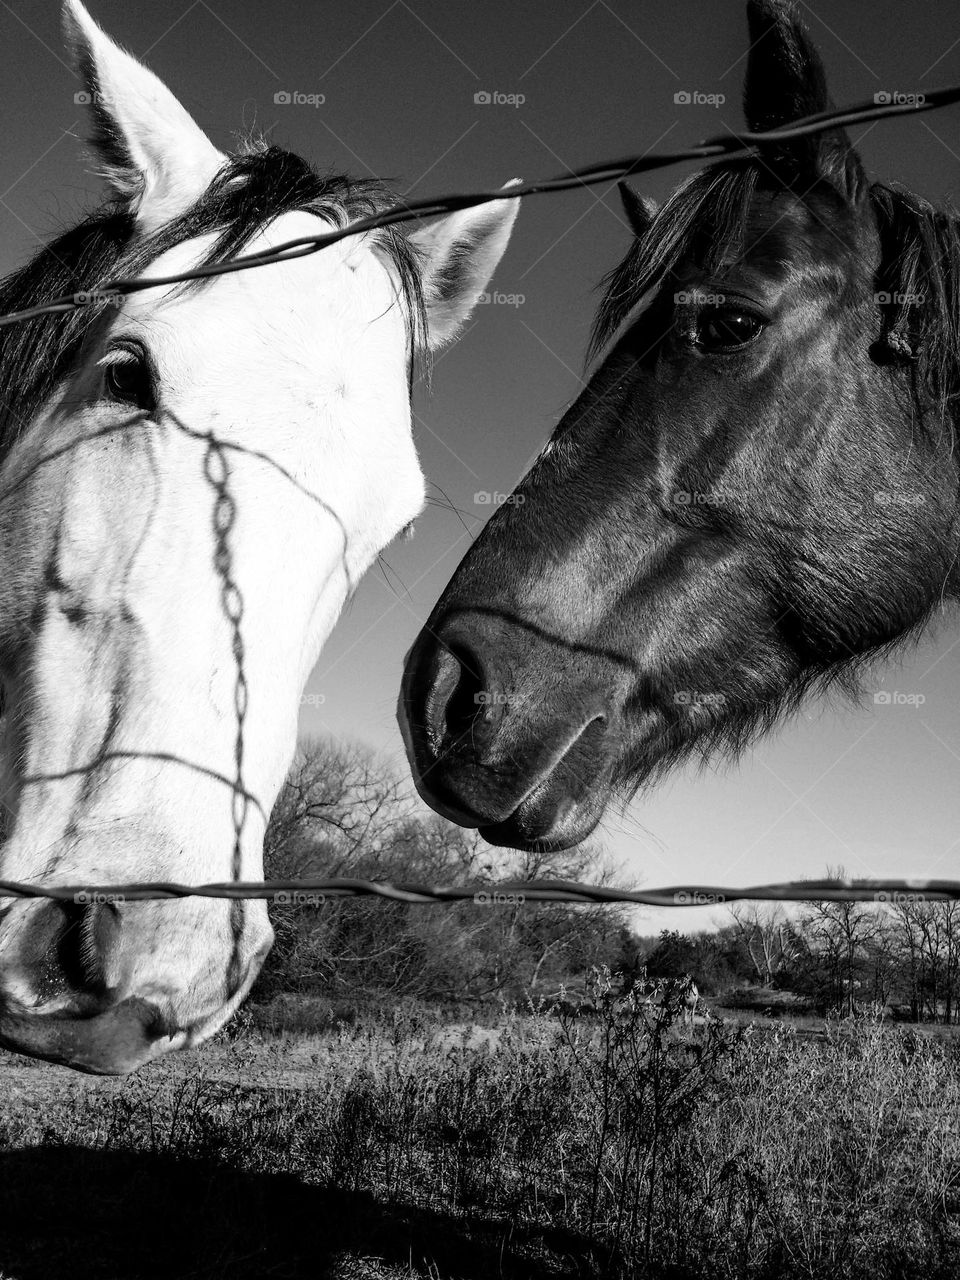 Horses in Black & White From the Ground Up